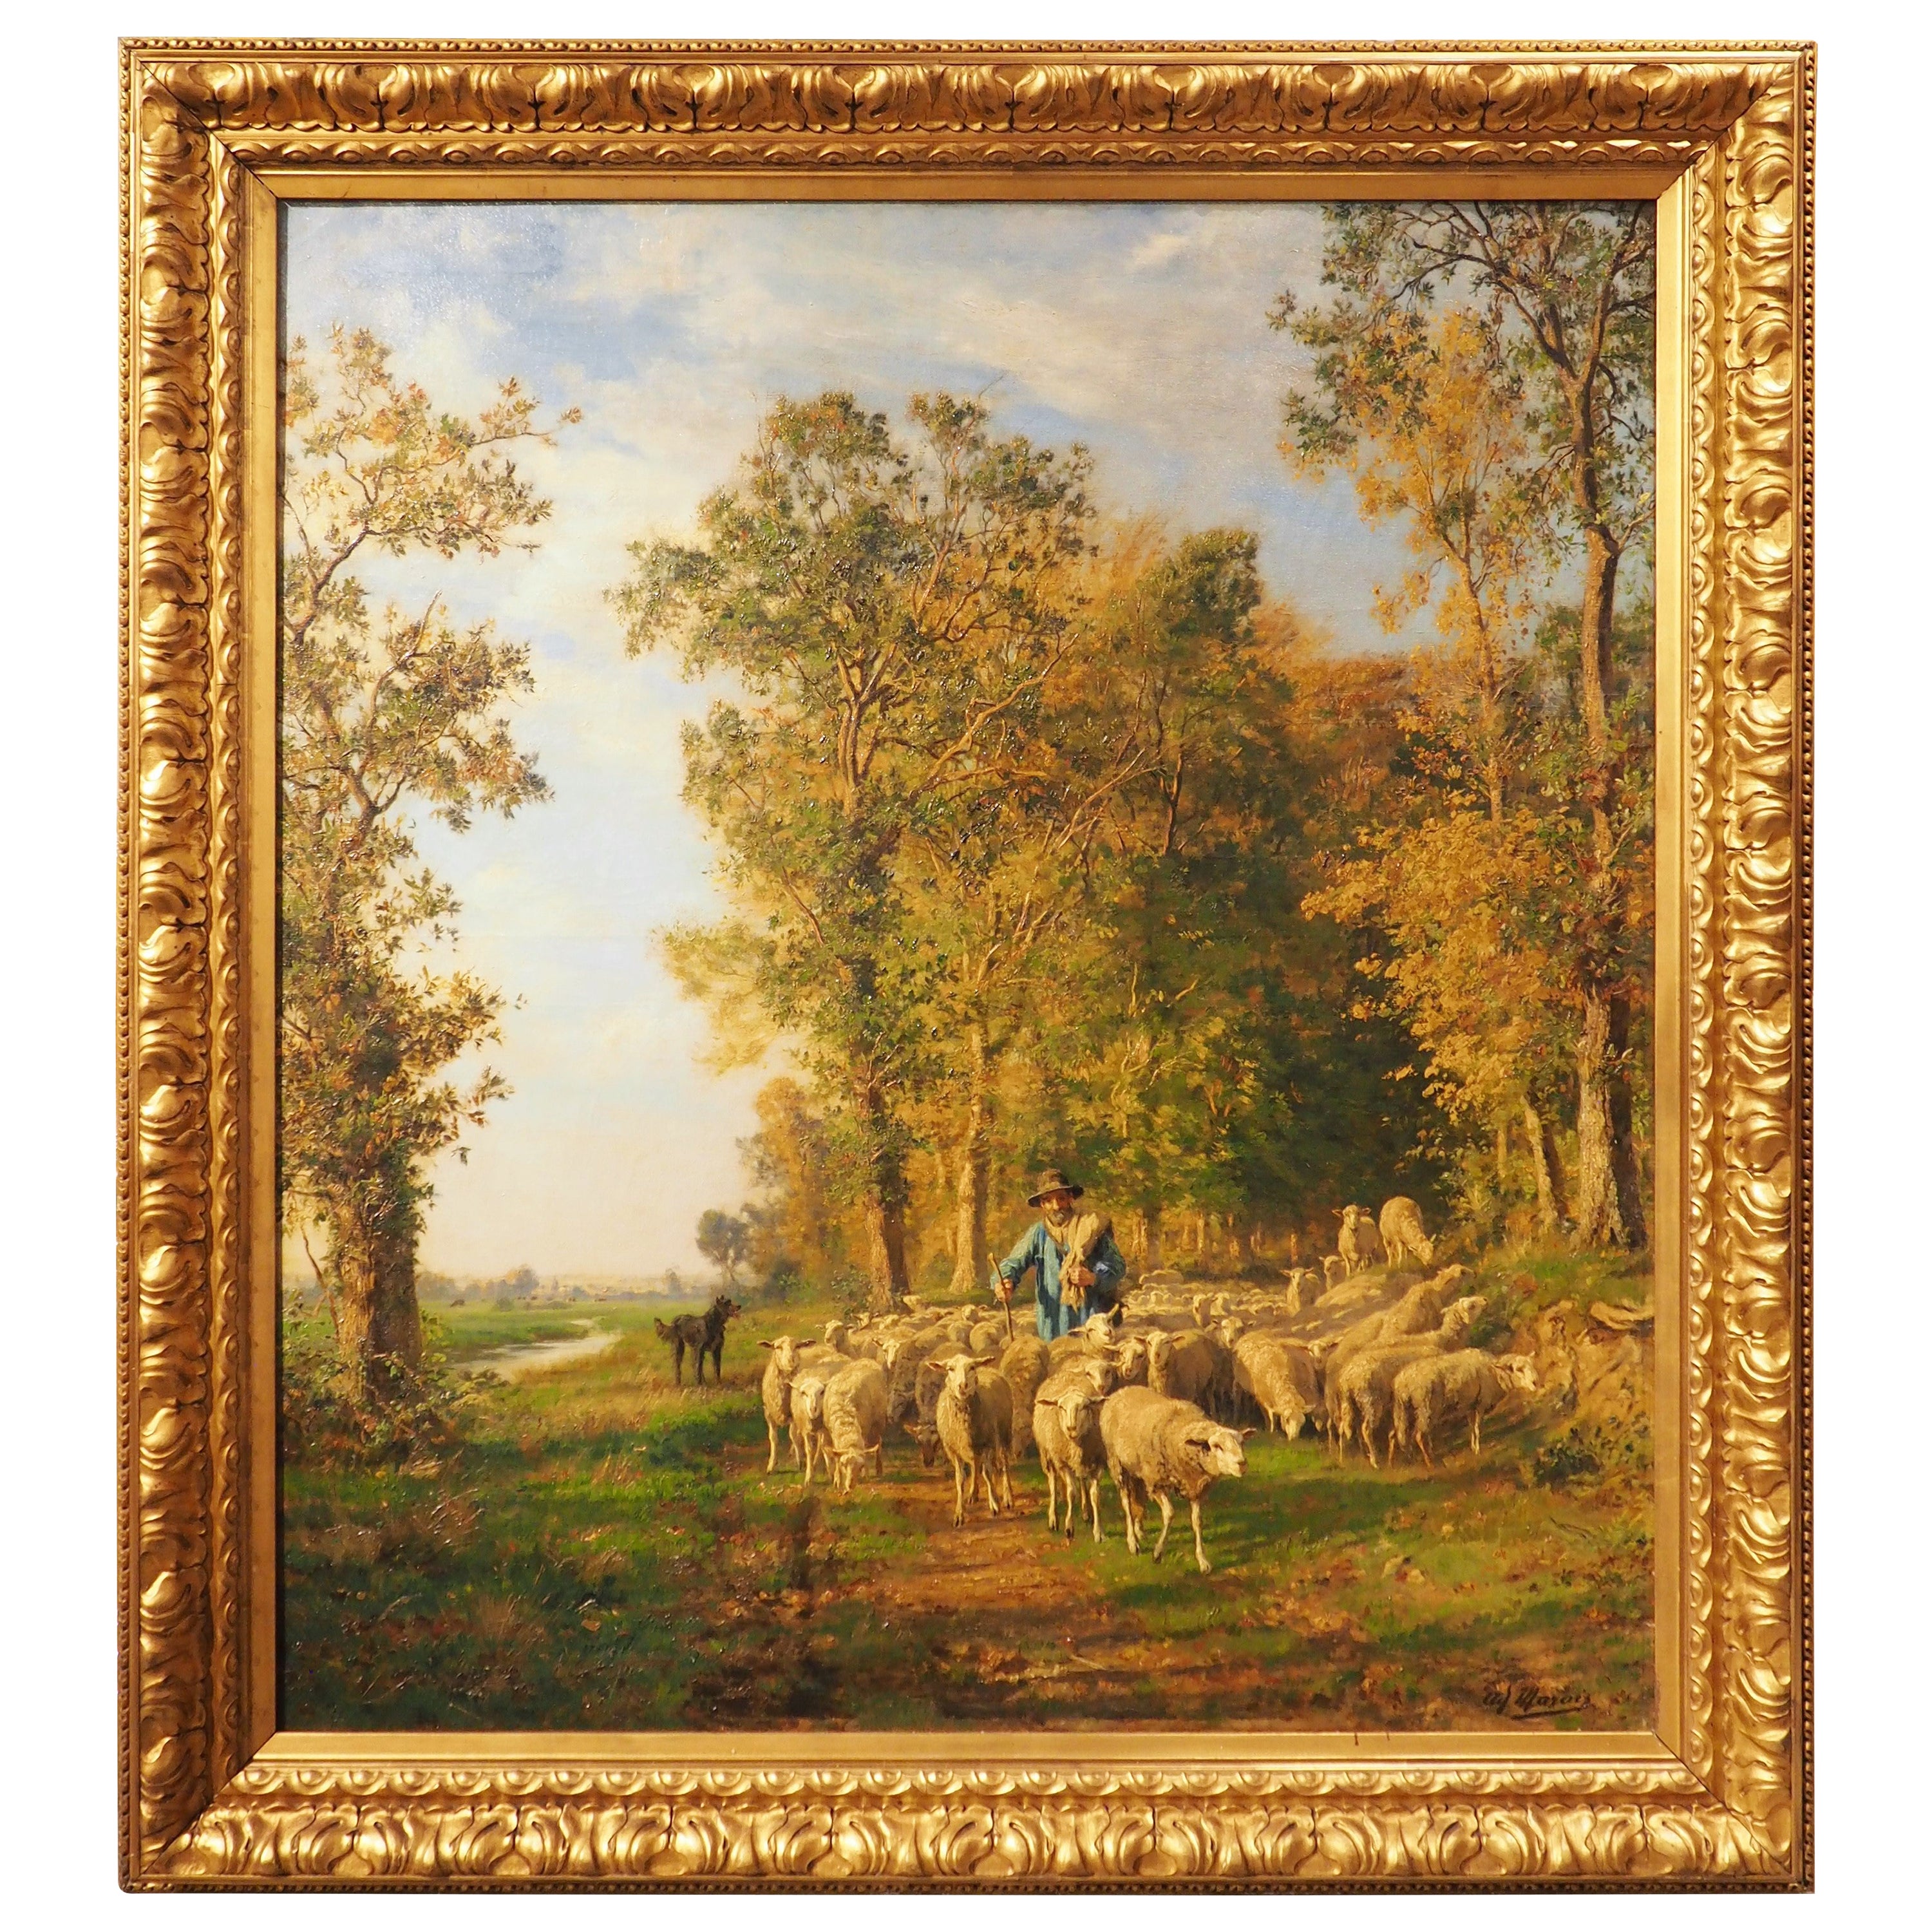 Large French Pastoral Oil on Canvas by Adolphe Marais 1856-1940, H-64 3/8 Inches